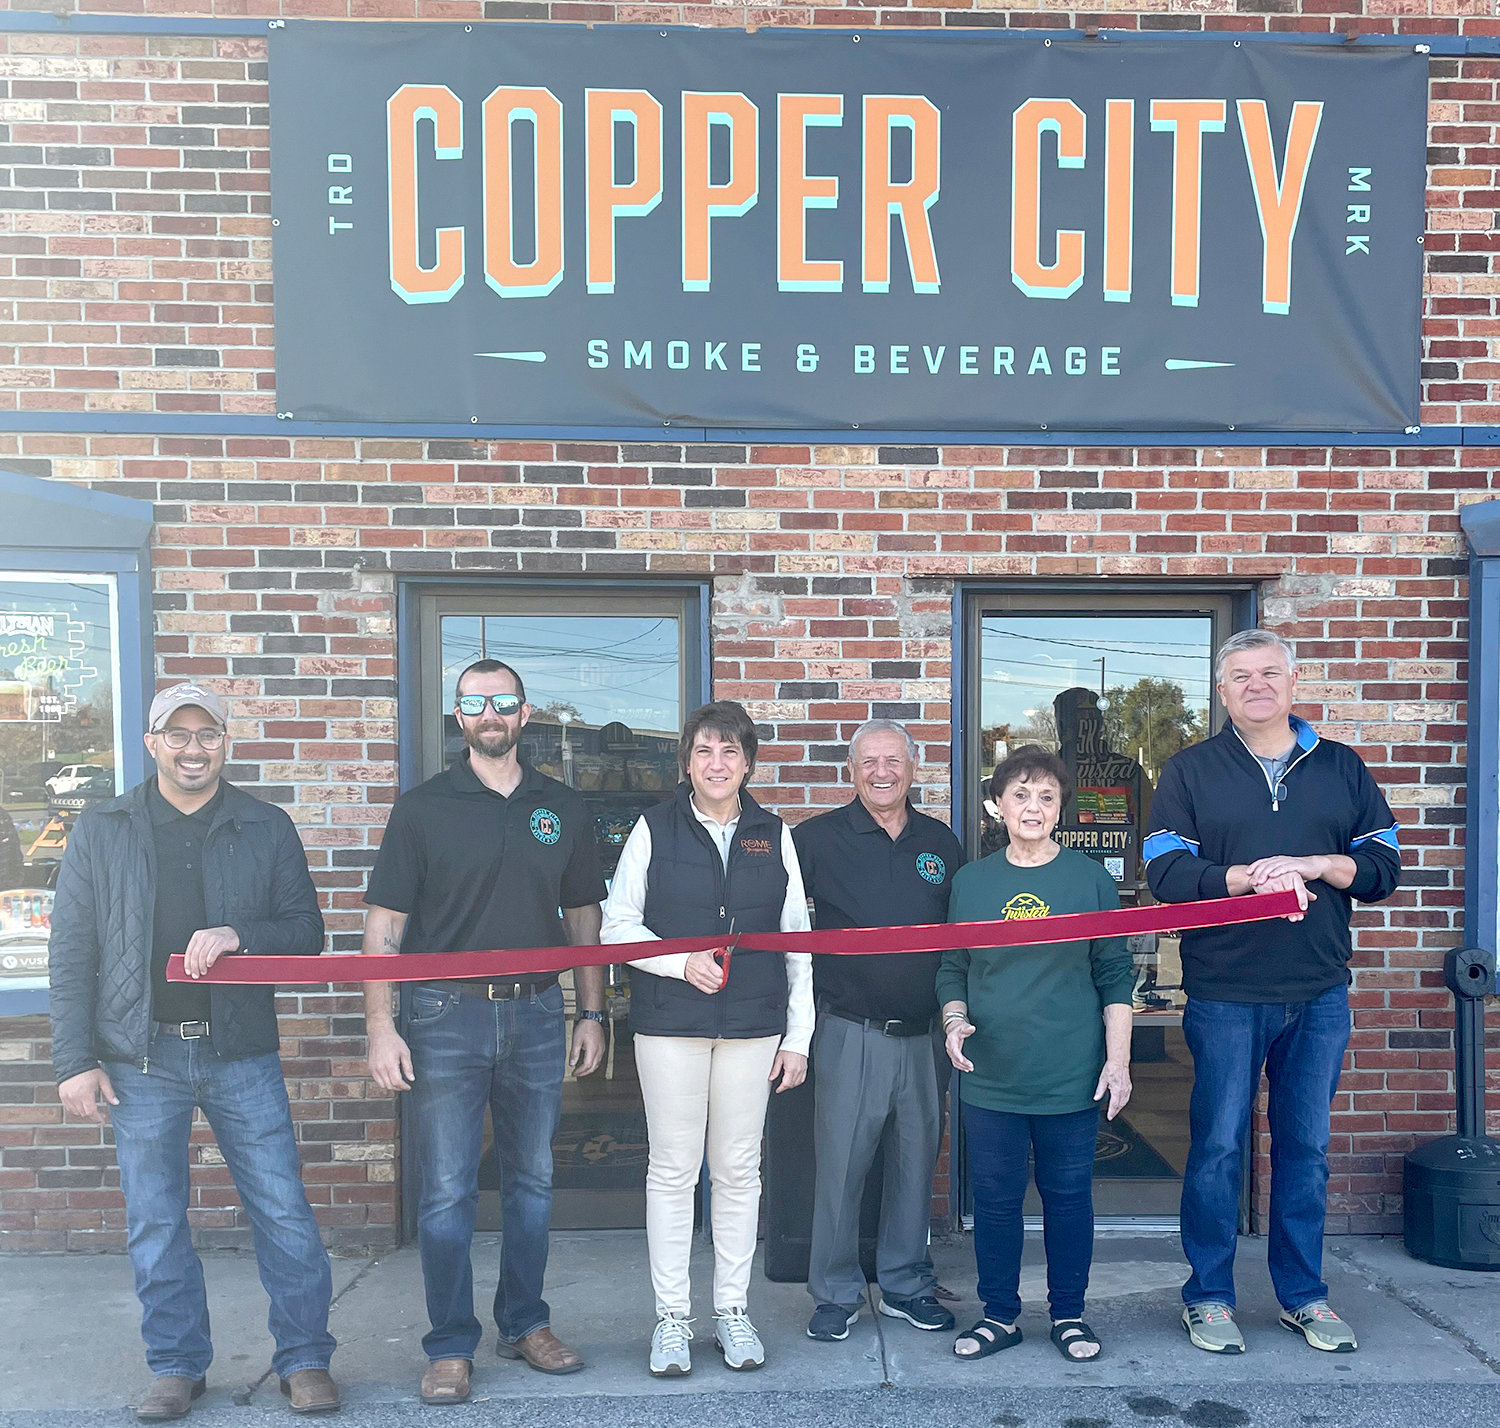 Copper City Smoke & Beverage, 218 S. James St., Rome, celebrated its grand opening with a ribbon cutting and open house on Saturday, Oct. 29. From left: Michael J. Luiere, co-owner; Anthony Varano, co-owner; Mayor Jacqueline M. Izzo; Rocco Luiere, co-owner; Fourth Ward Councilor Ramona L. Smith; and Duane Latham. Copper City Smoke & Beverage has a 1,800 square-foot, walk-in store with a unique variety of beers from local and out-of-state microbreweries, as well as larger beer companies, in addition to ciders and seltzers. There is also a wide selection of traditional and alternative smoking products, as well as potato chips and other snacks.